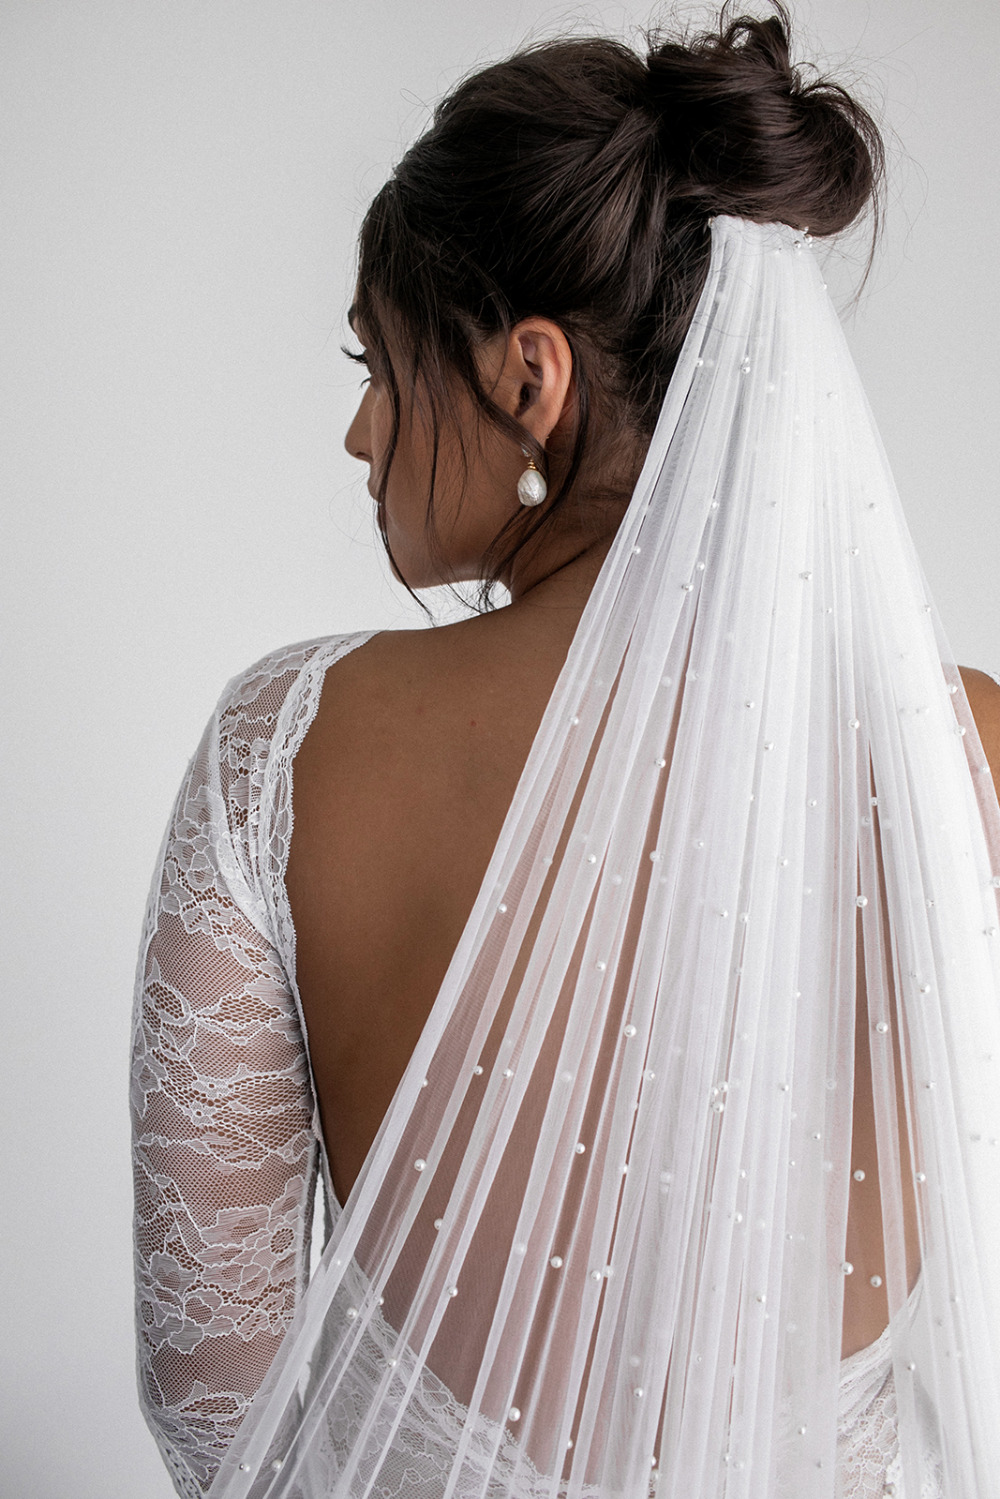 grace-loves-laceshopveils-and-hairpearly-long-veil